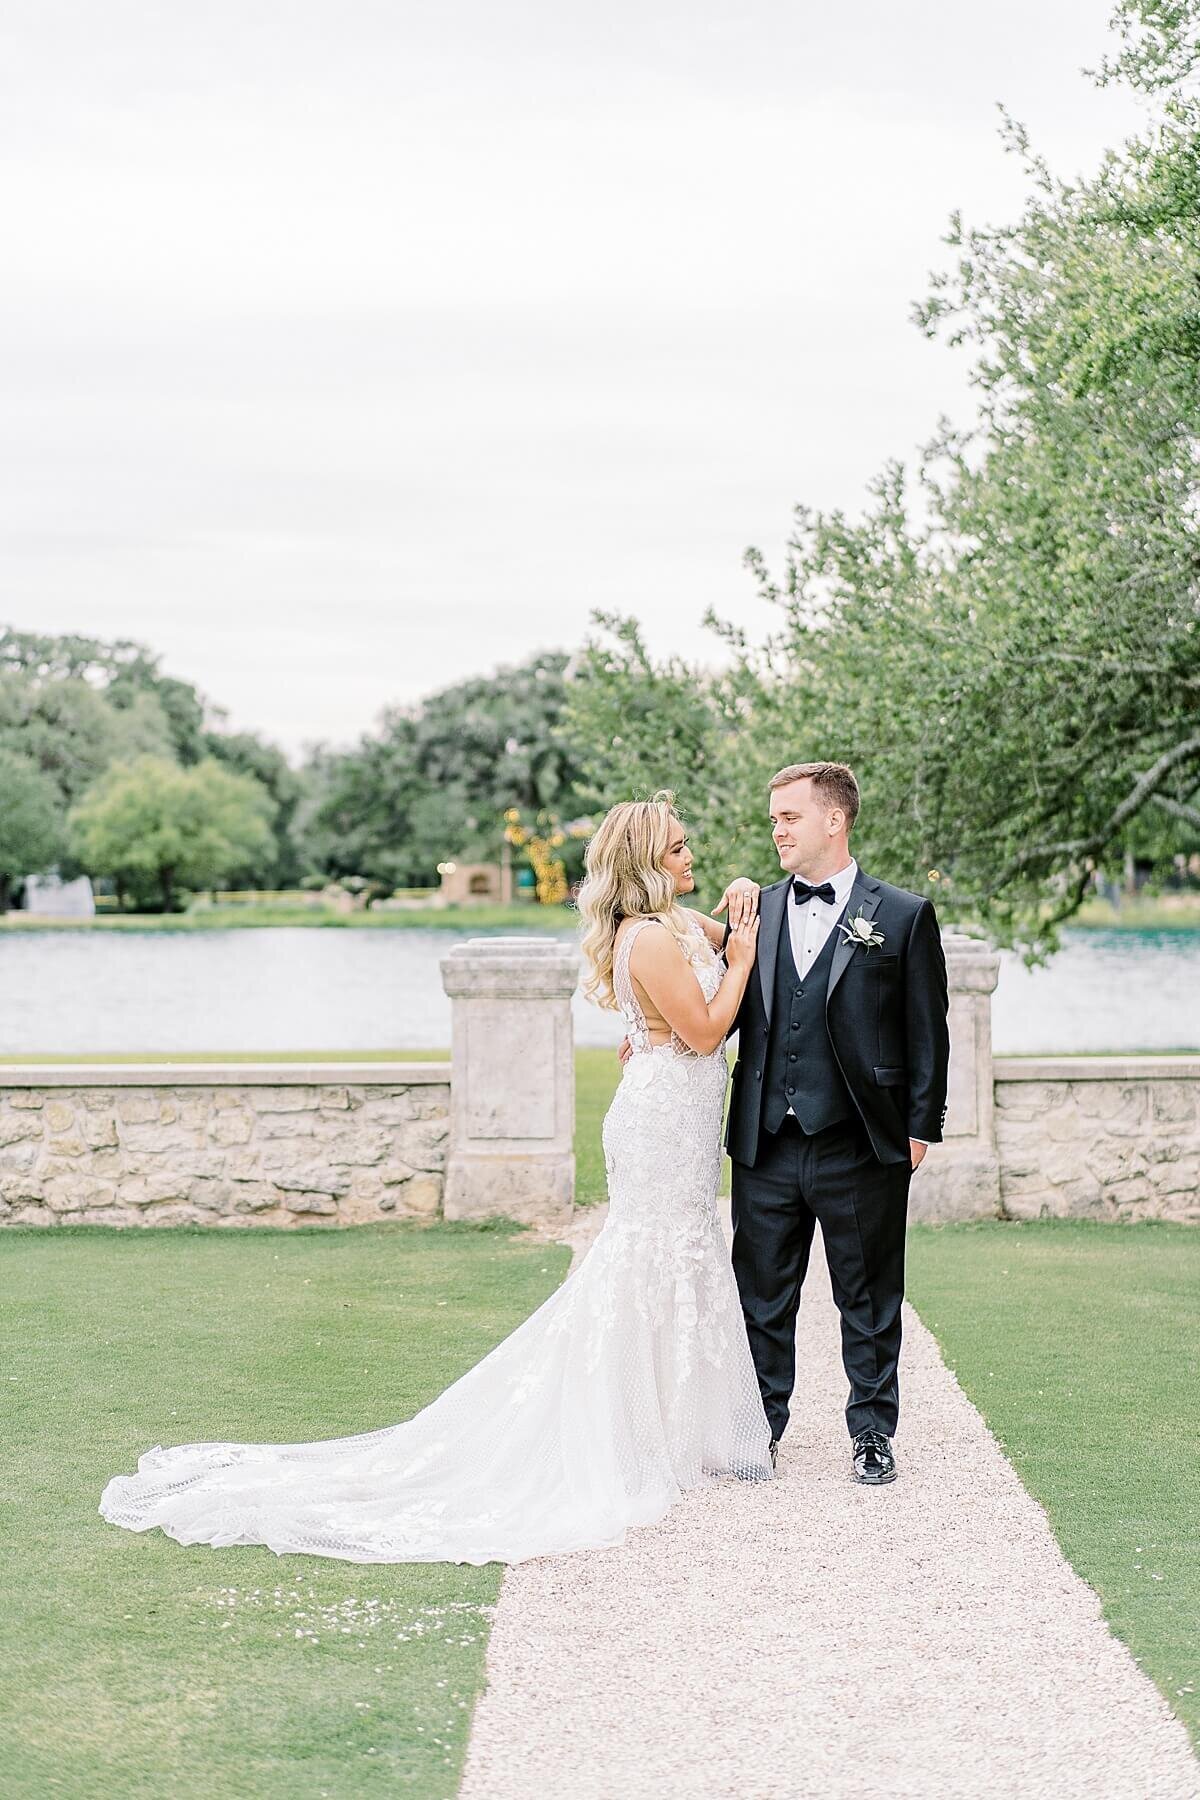 Spring-European-Style-Wedding-at-The-Clubs-at-Houston-Oaks-Two-Be-Wed-Alicia-Yarrish-Photography_0057